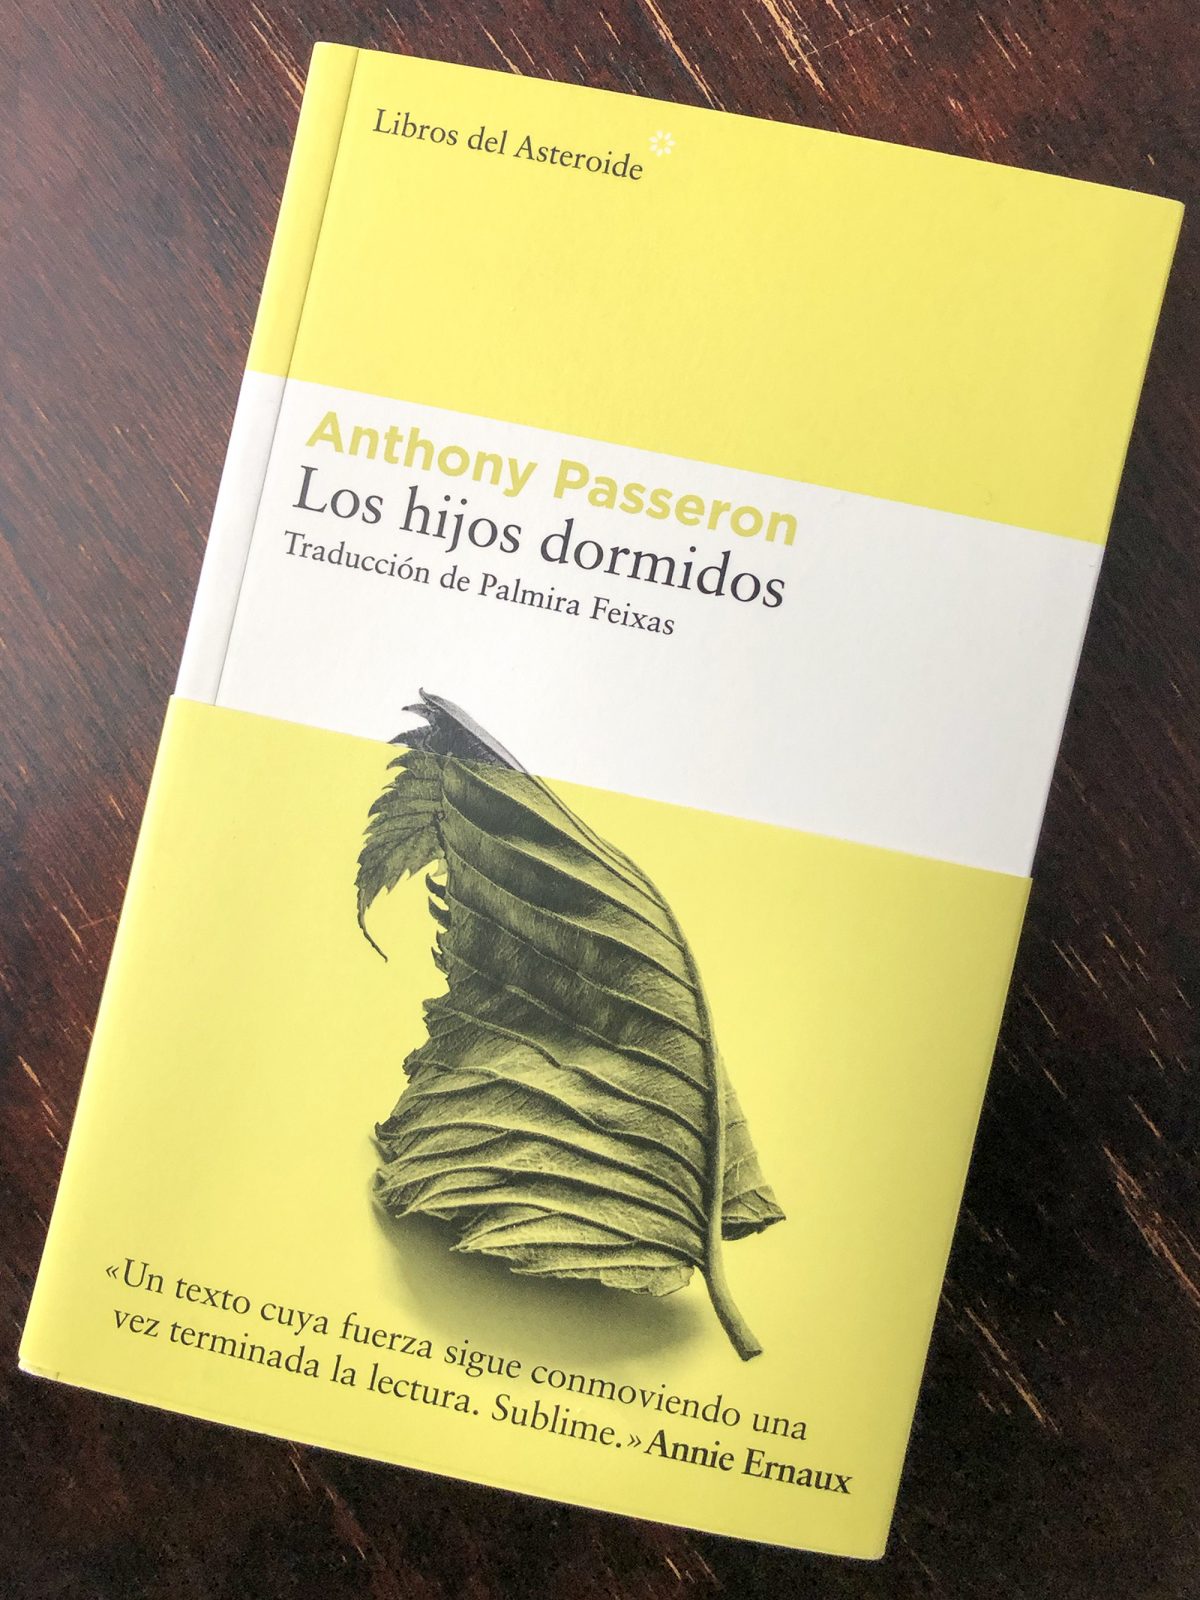 Los Hijos Dormidos by Anthony Passeron, translated into Spanish by Barcelona-based Libros del Asteroide. Cover photo by Keith Dotson.